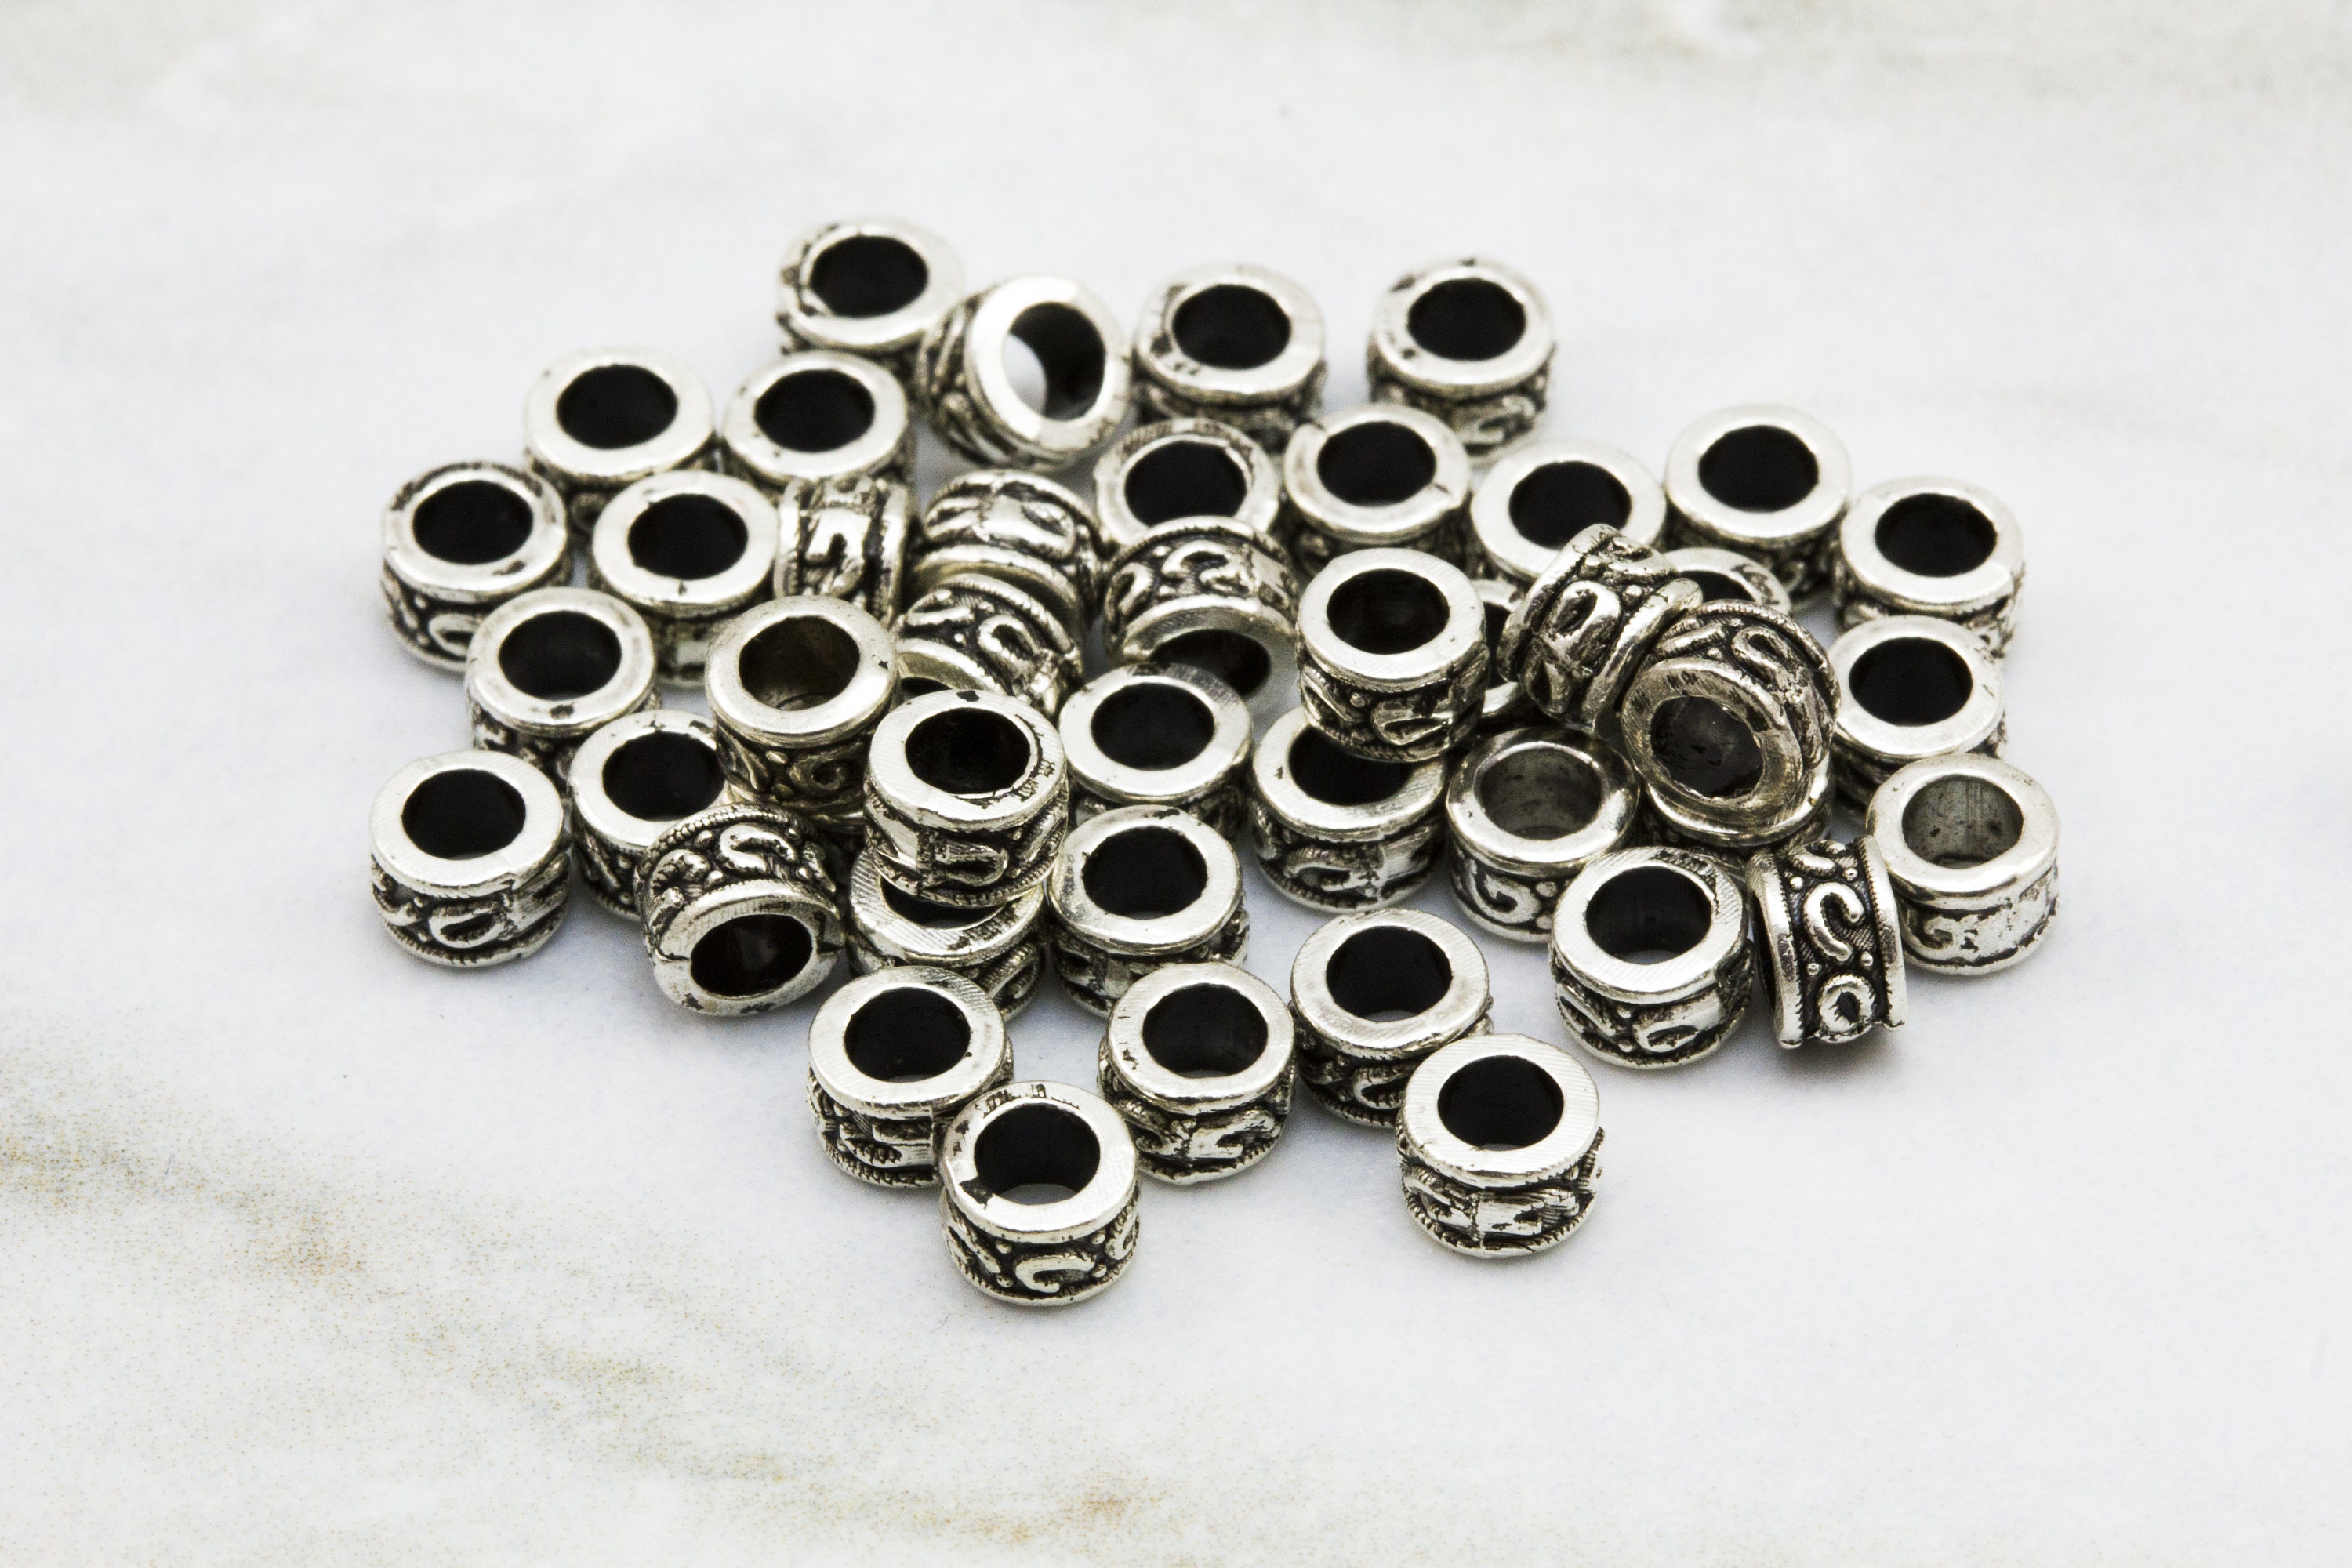 50 pcs Oval Spacer Beads 5mm Silver Colour Metal Mini Spacer Beads MB ...